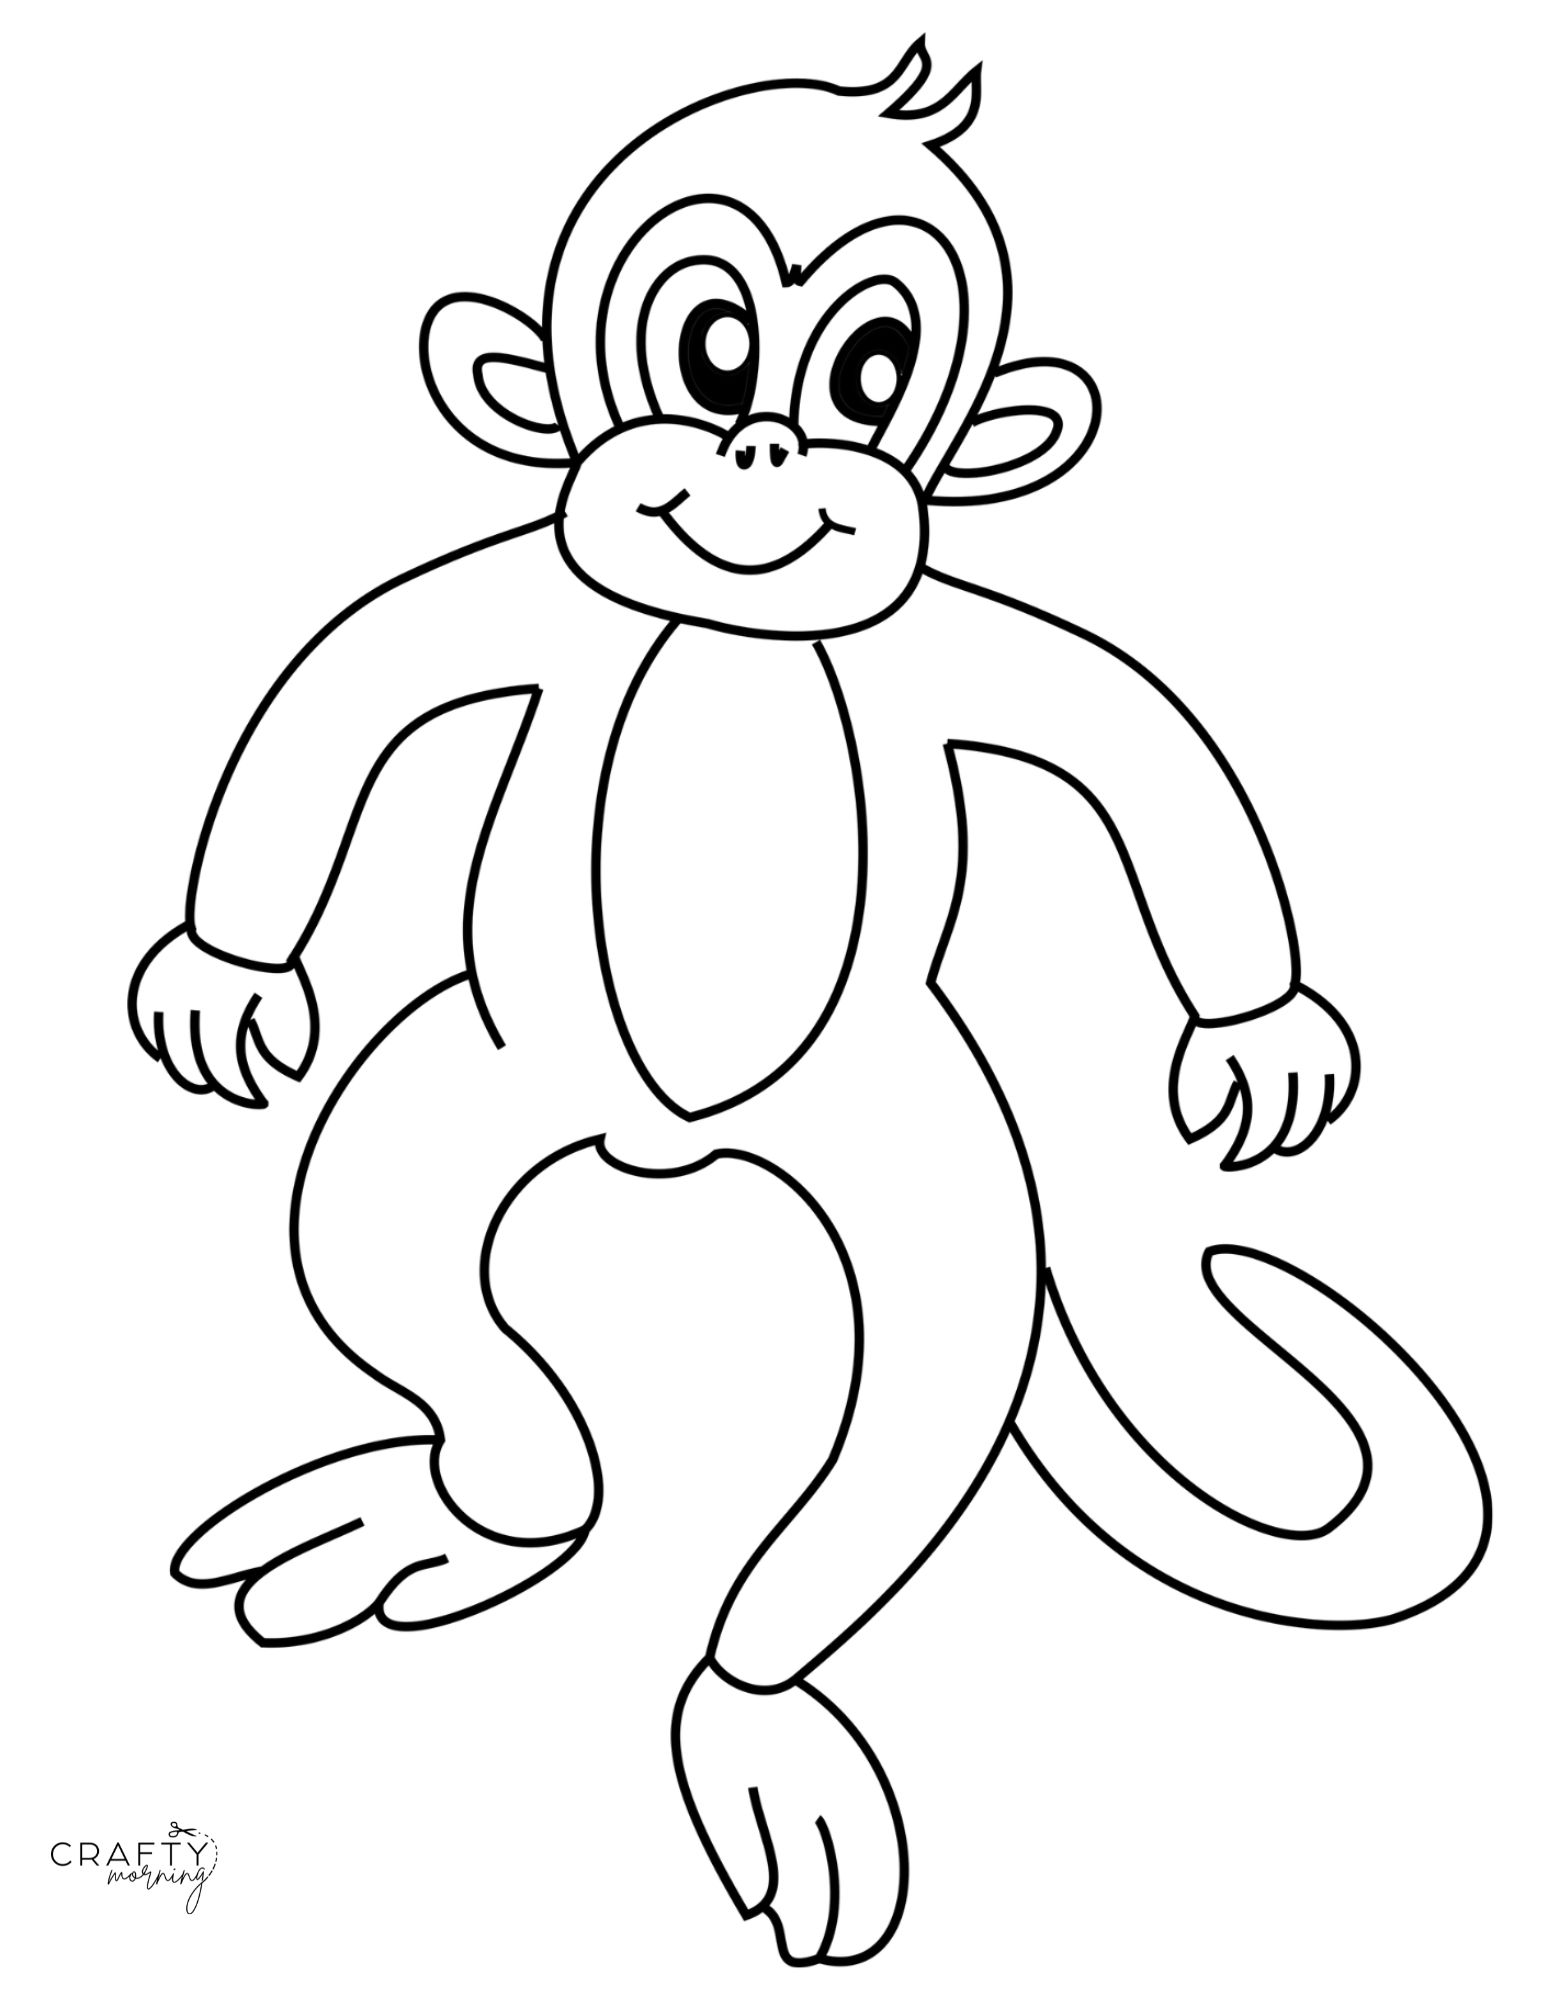 Monkey color drawing | Drawing a monkey step by step | Coloring A Monkey -  YouTube